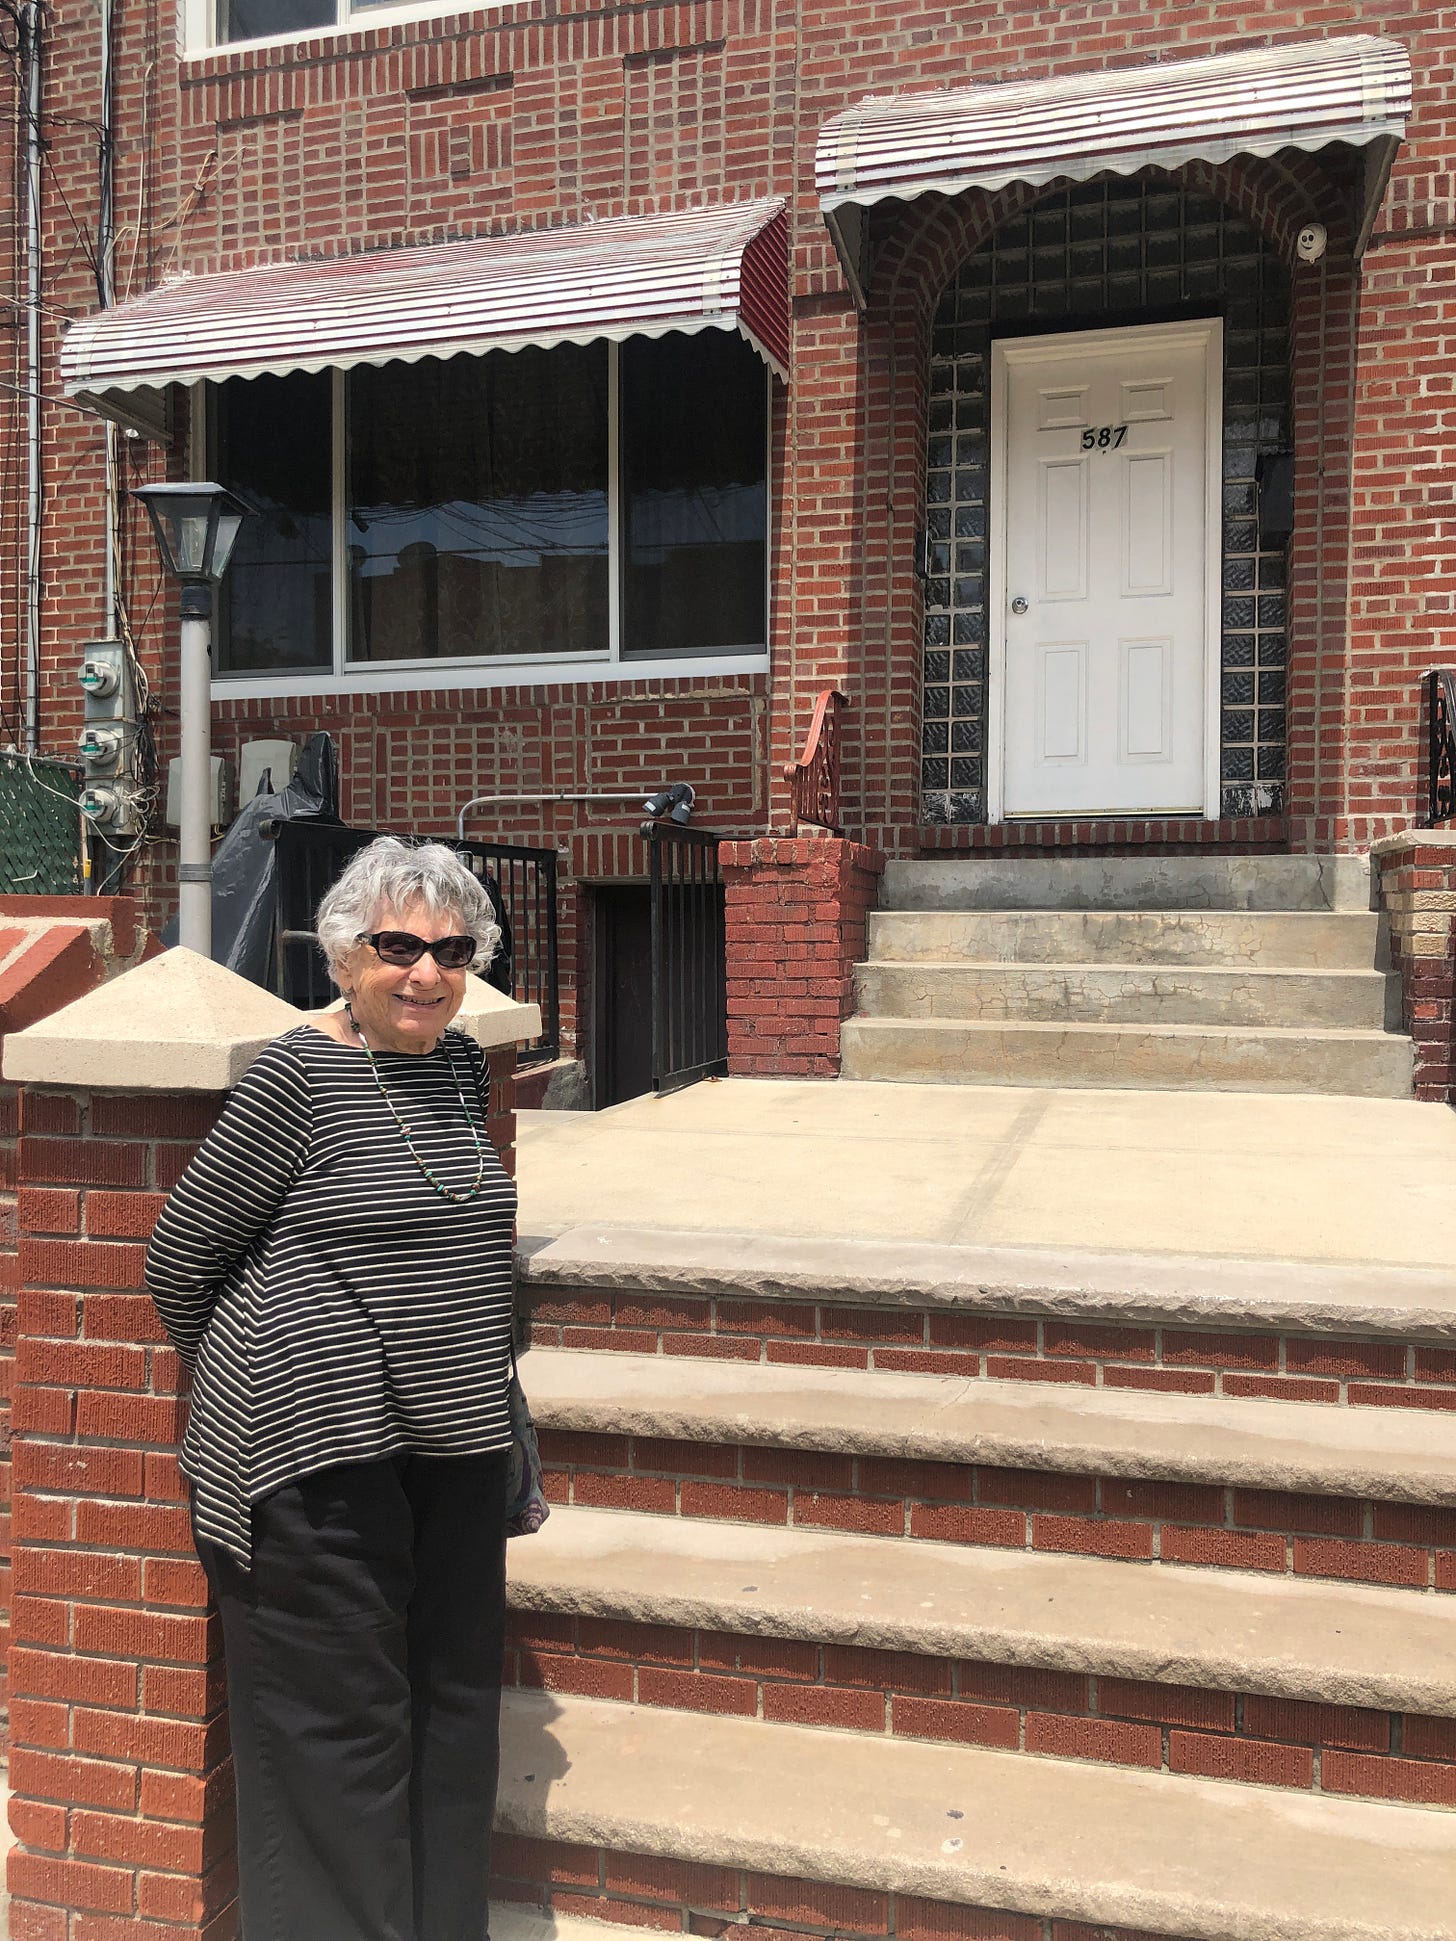 My grandma in sunglasses and a stripey shirt, in front of a brownstone in Brooklyn.